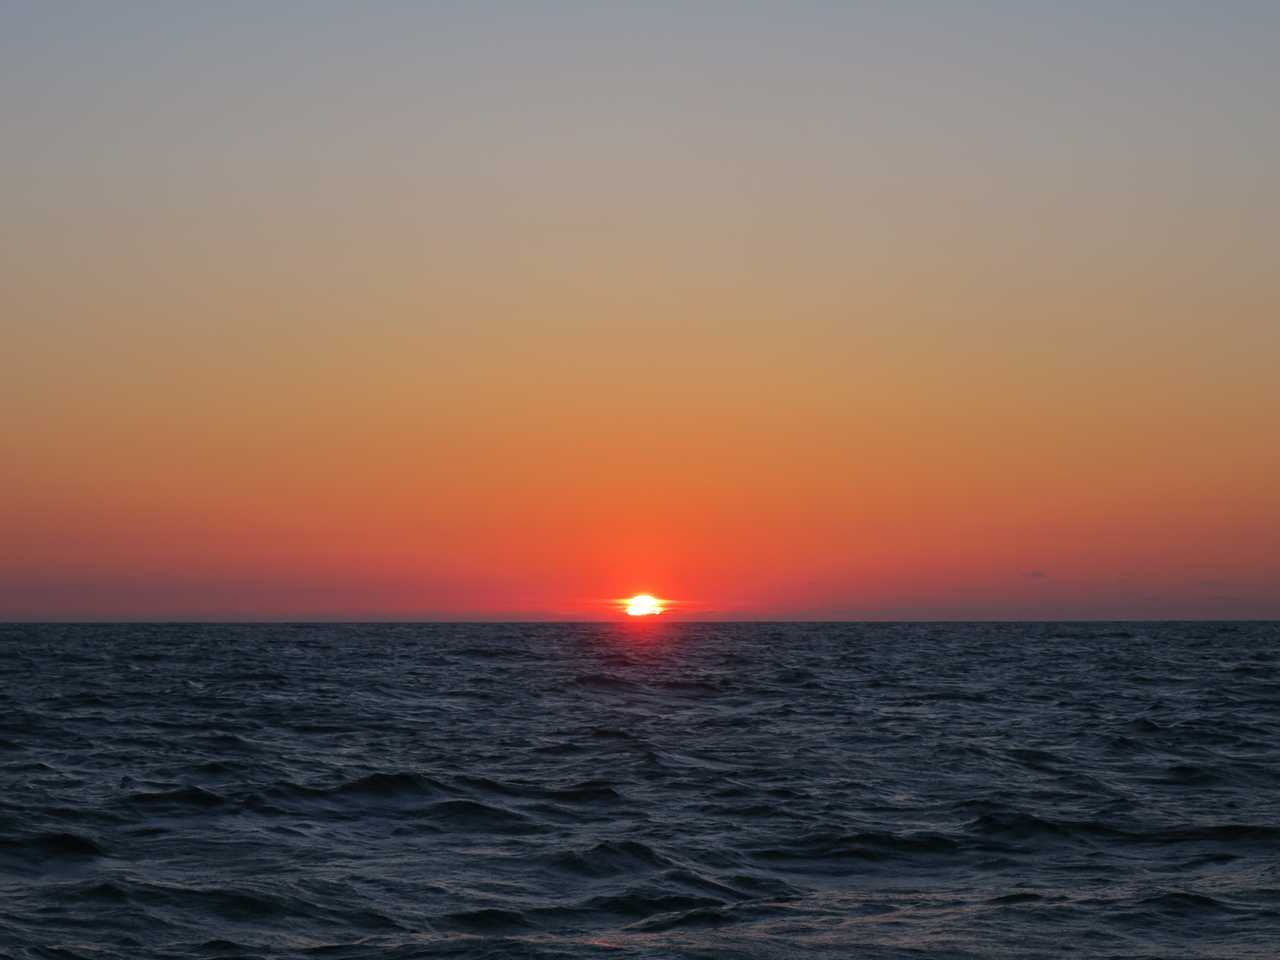 There is nothing like experiencing dawn on a boat.